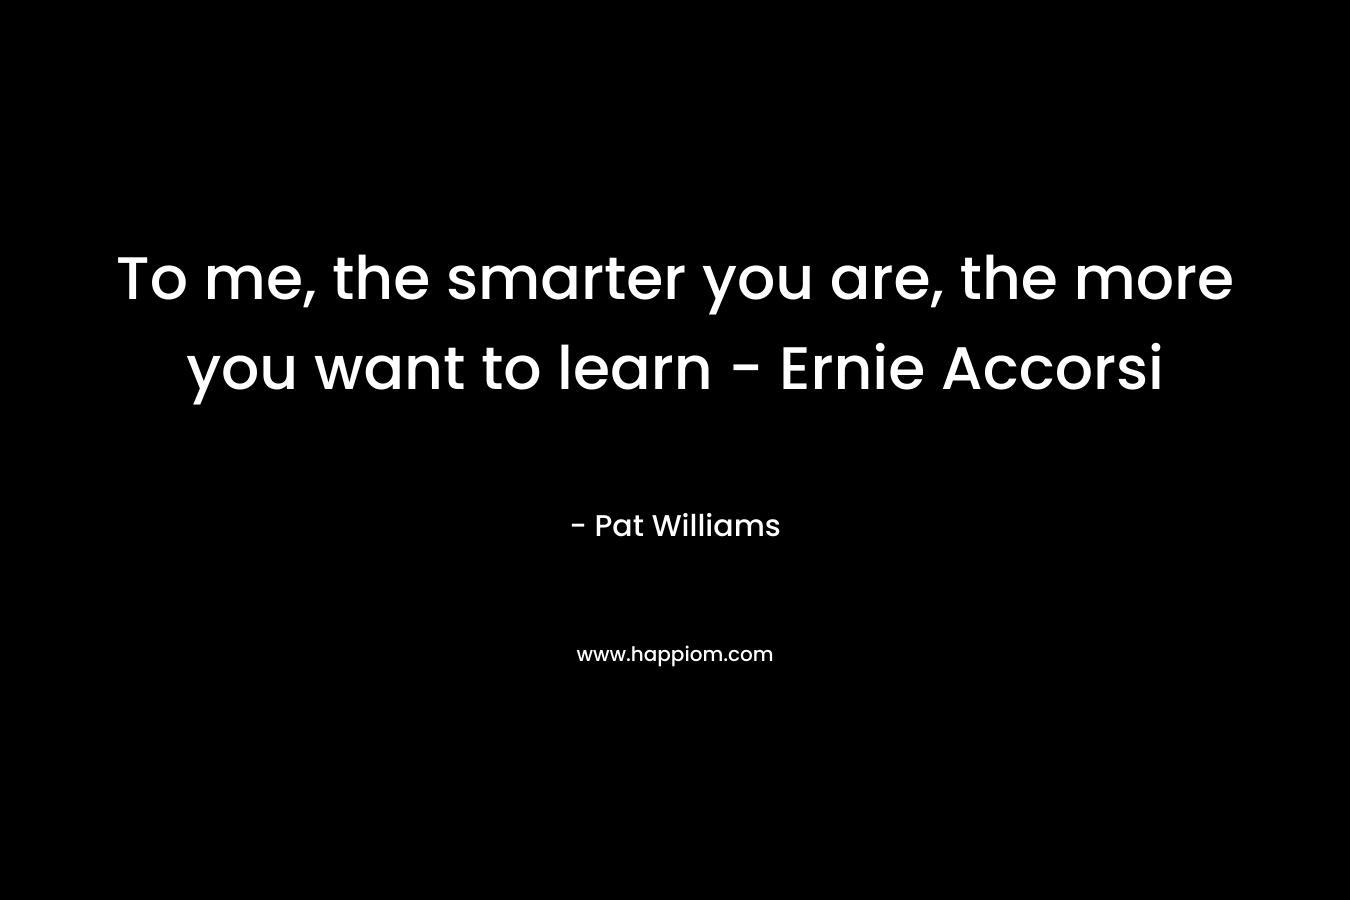 To me, the smarter you are, the more you want to learn - Ernie Accorsi